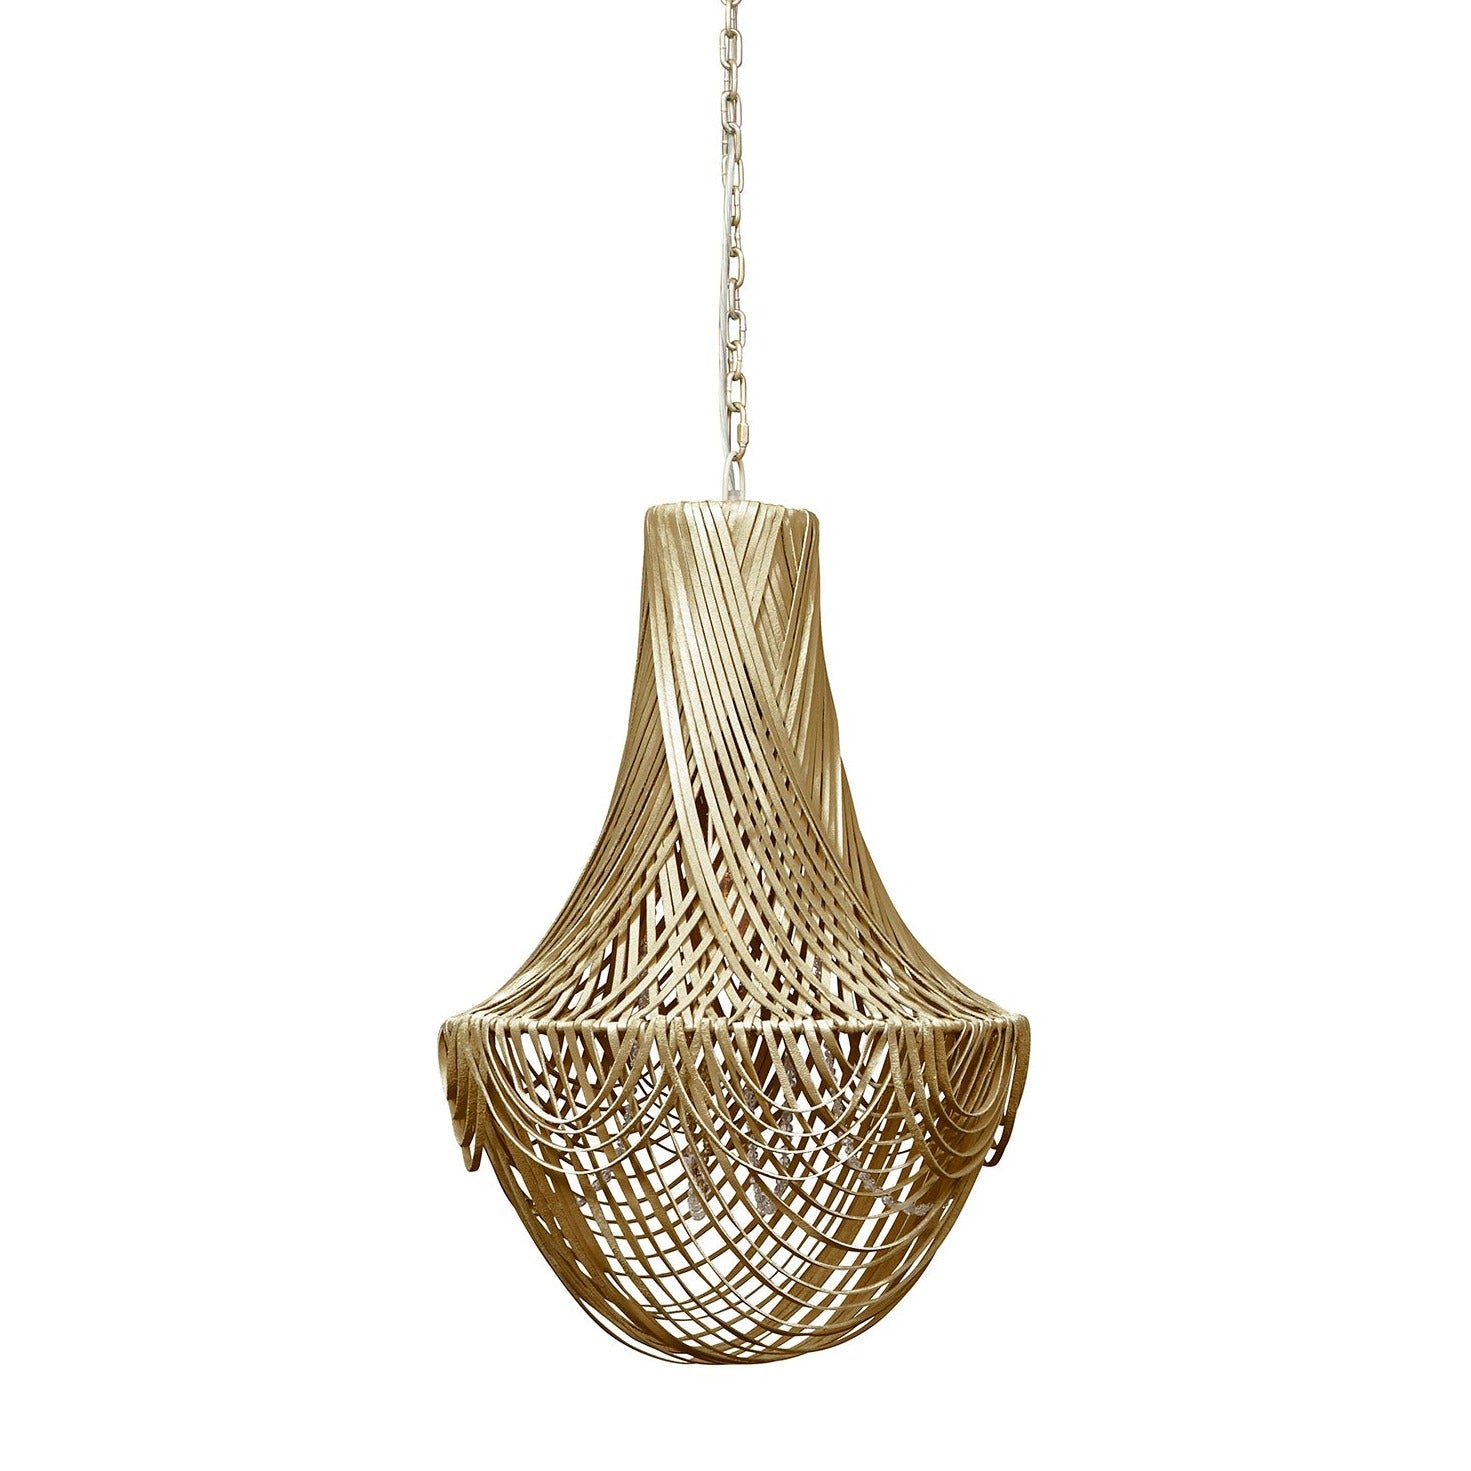 Small Empire Leather Chandelier in Metallic Leather